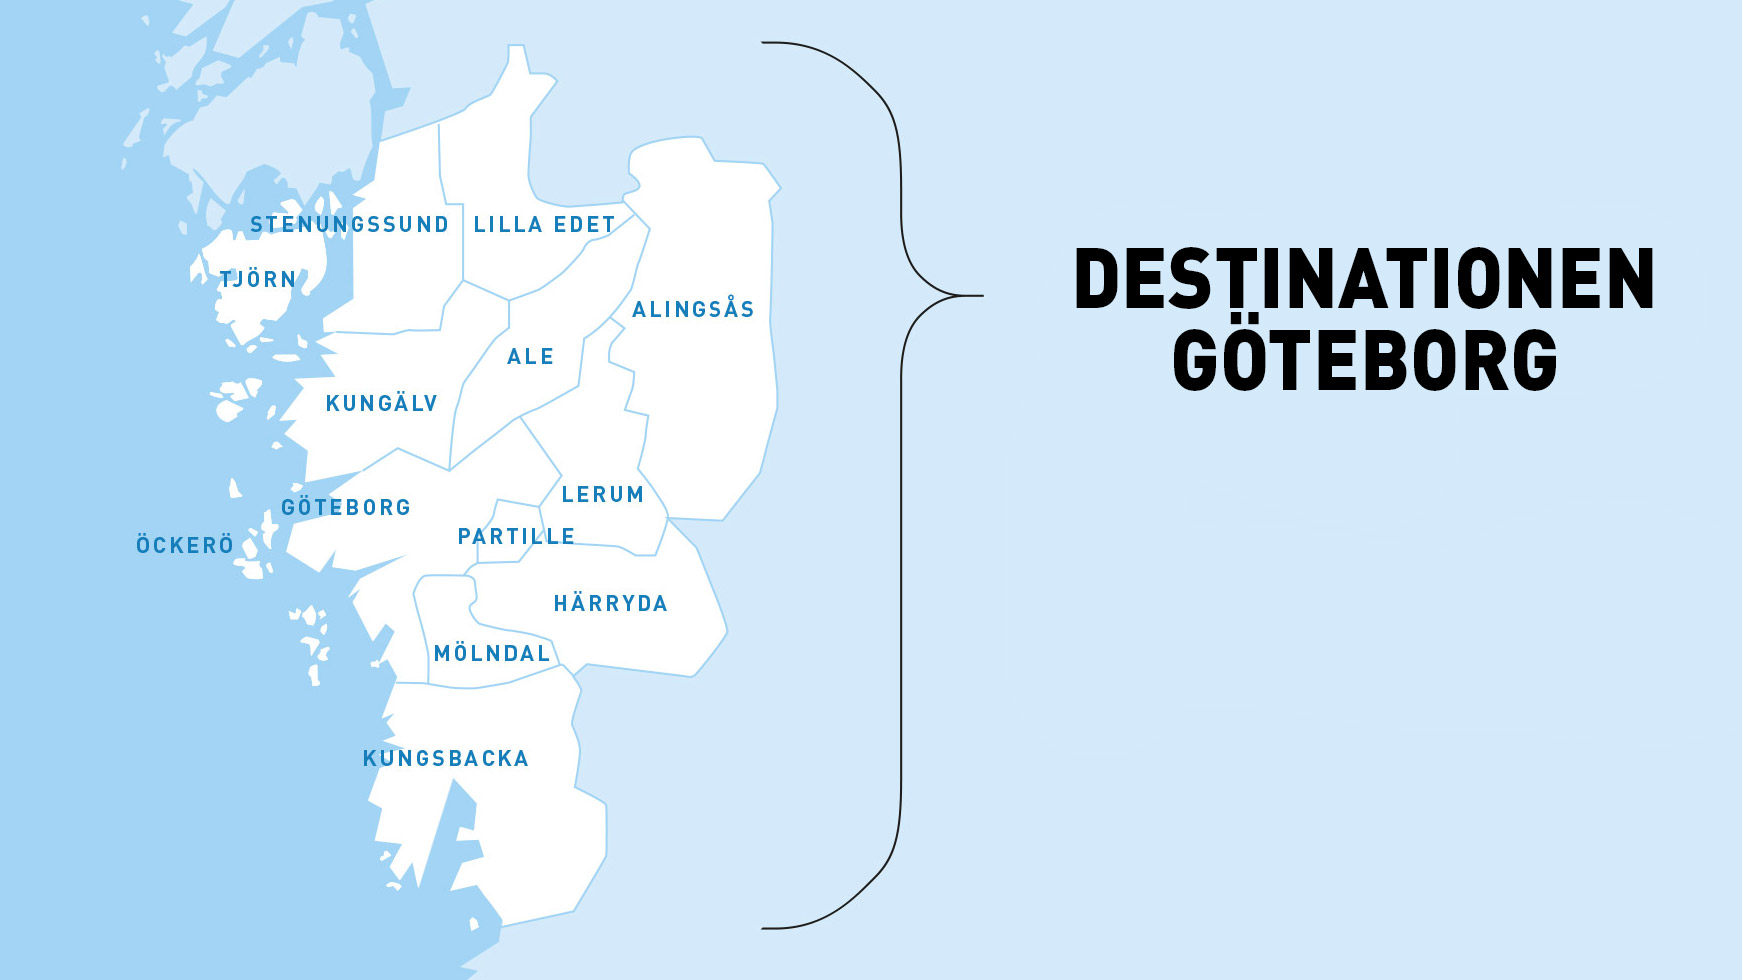 Map illustration of the area covering Destination Gothenburg, from Stenungssund and Lilla Edet in the north to Kungsbacka in the south.